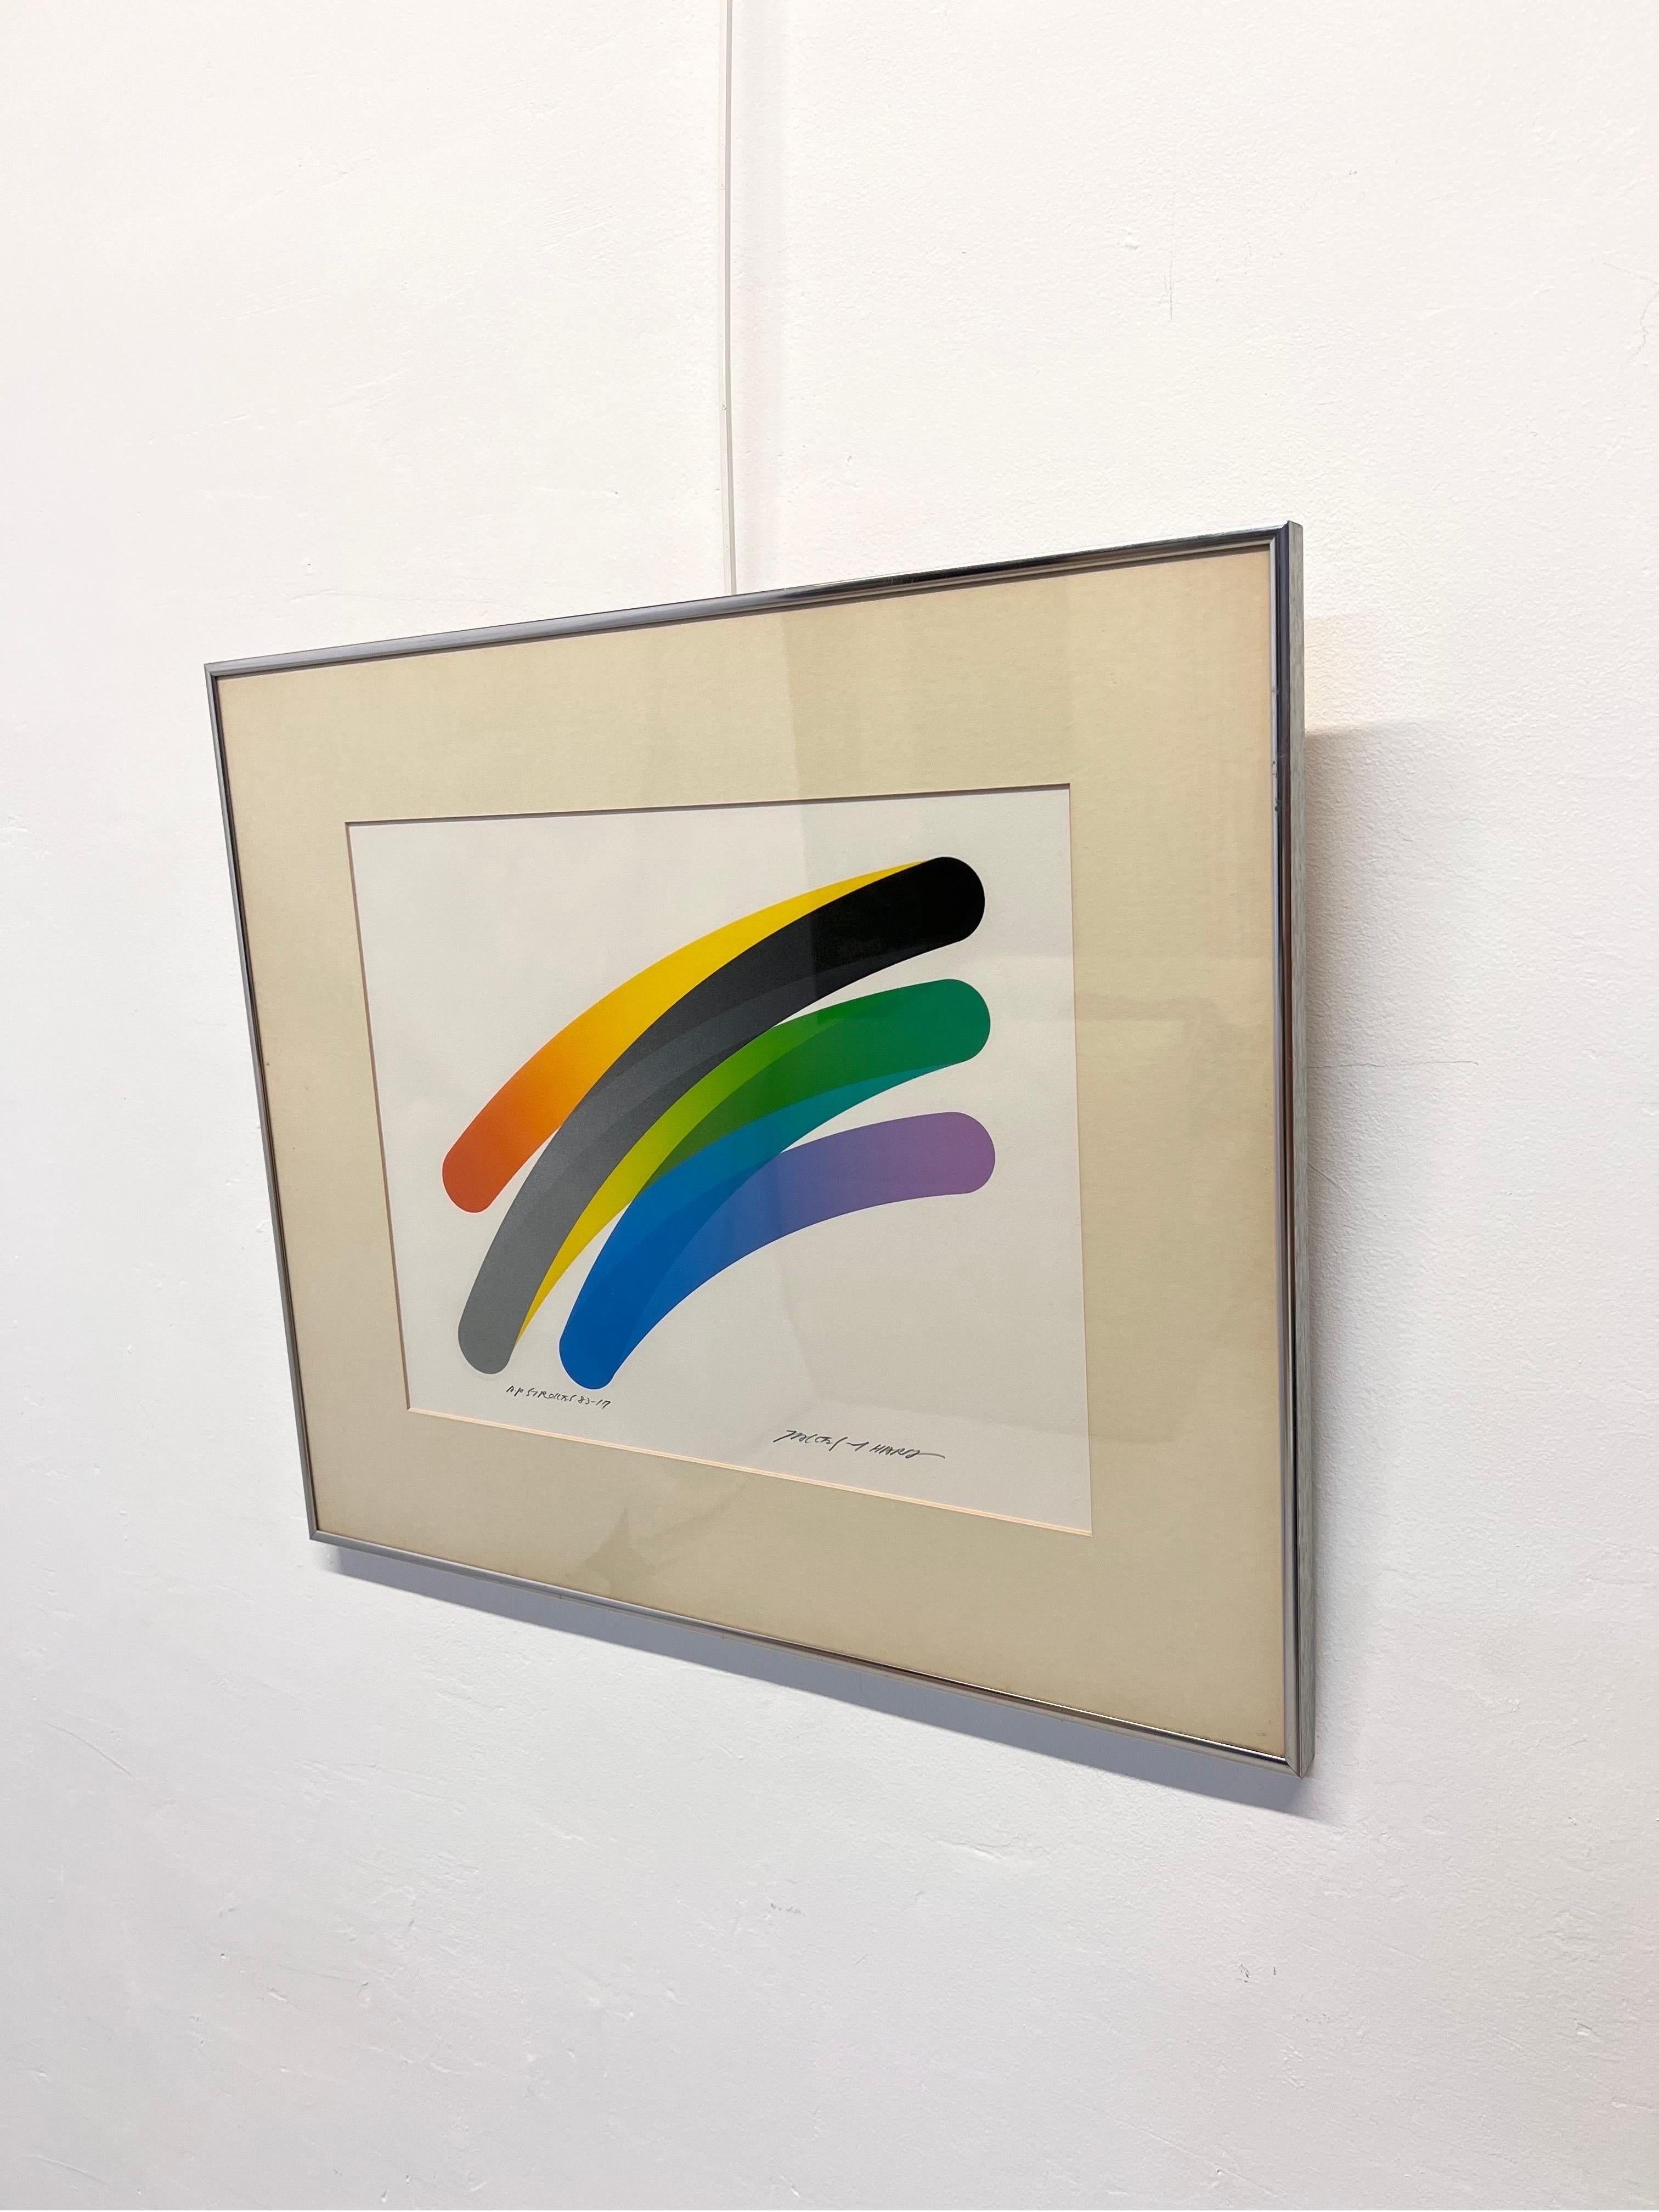 Original Takeshi Hara framed stokes lithograph on paper.

Strokes Verion 17
Dated 1983
Artist Proof, Signed.

Takeshi Hara is best known for his broad brush strokes applied in light-dark shading and color gradations. In his print works he